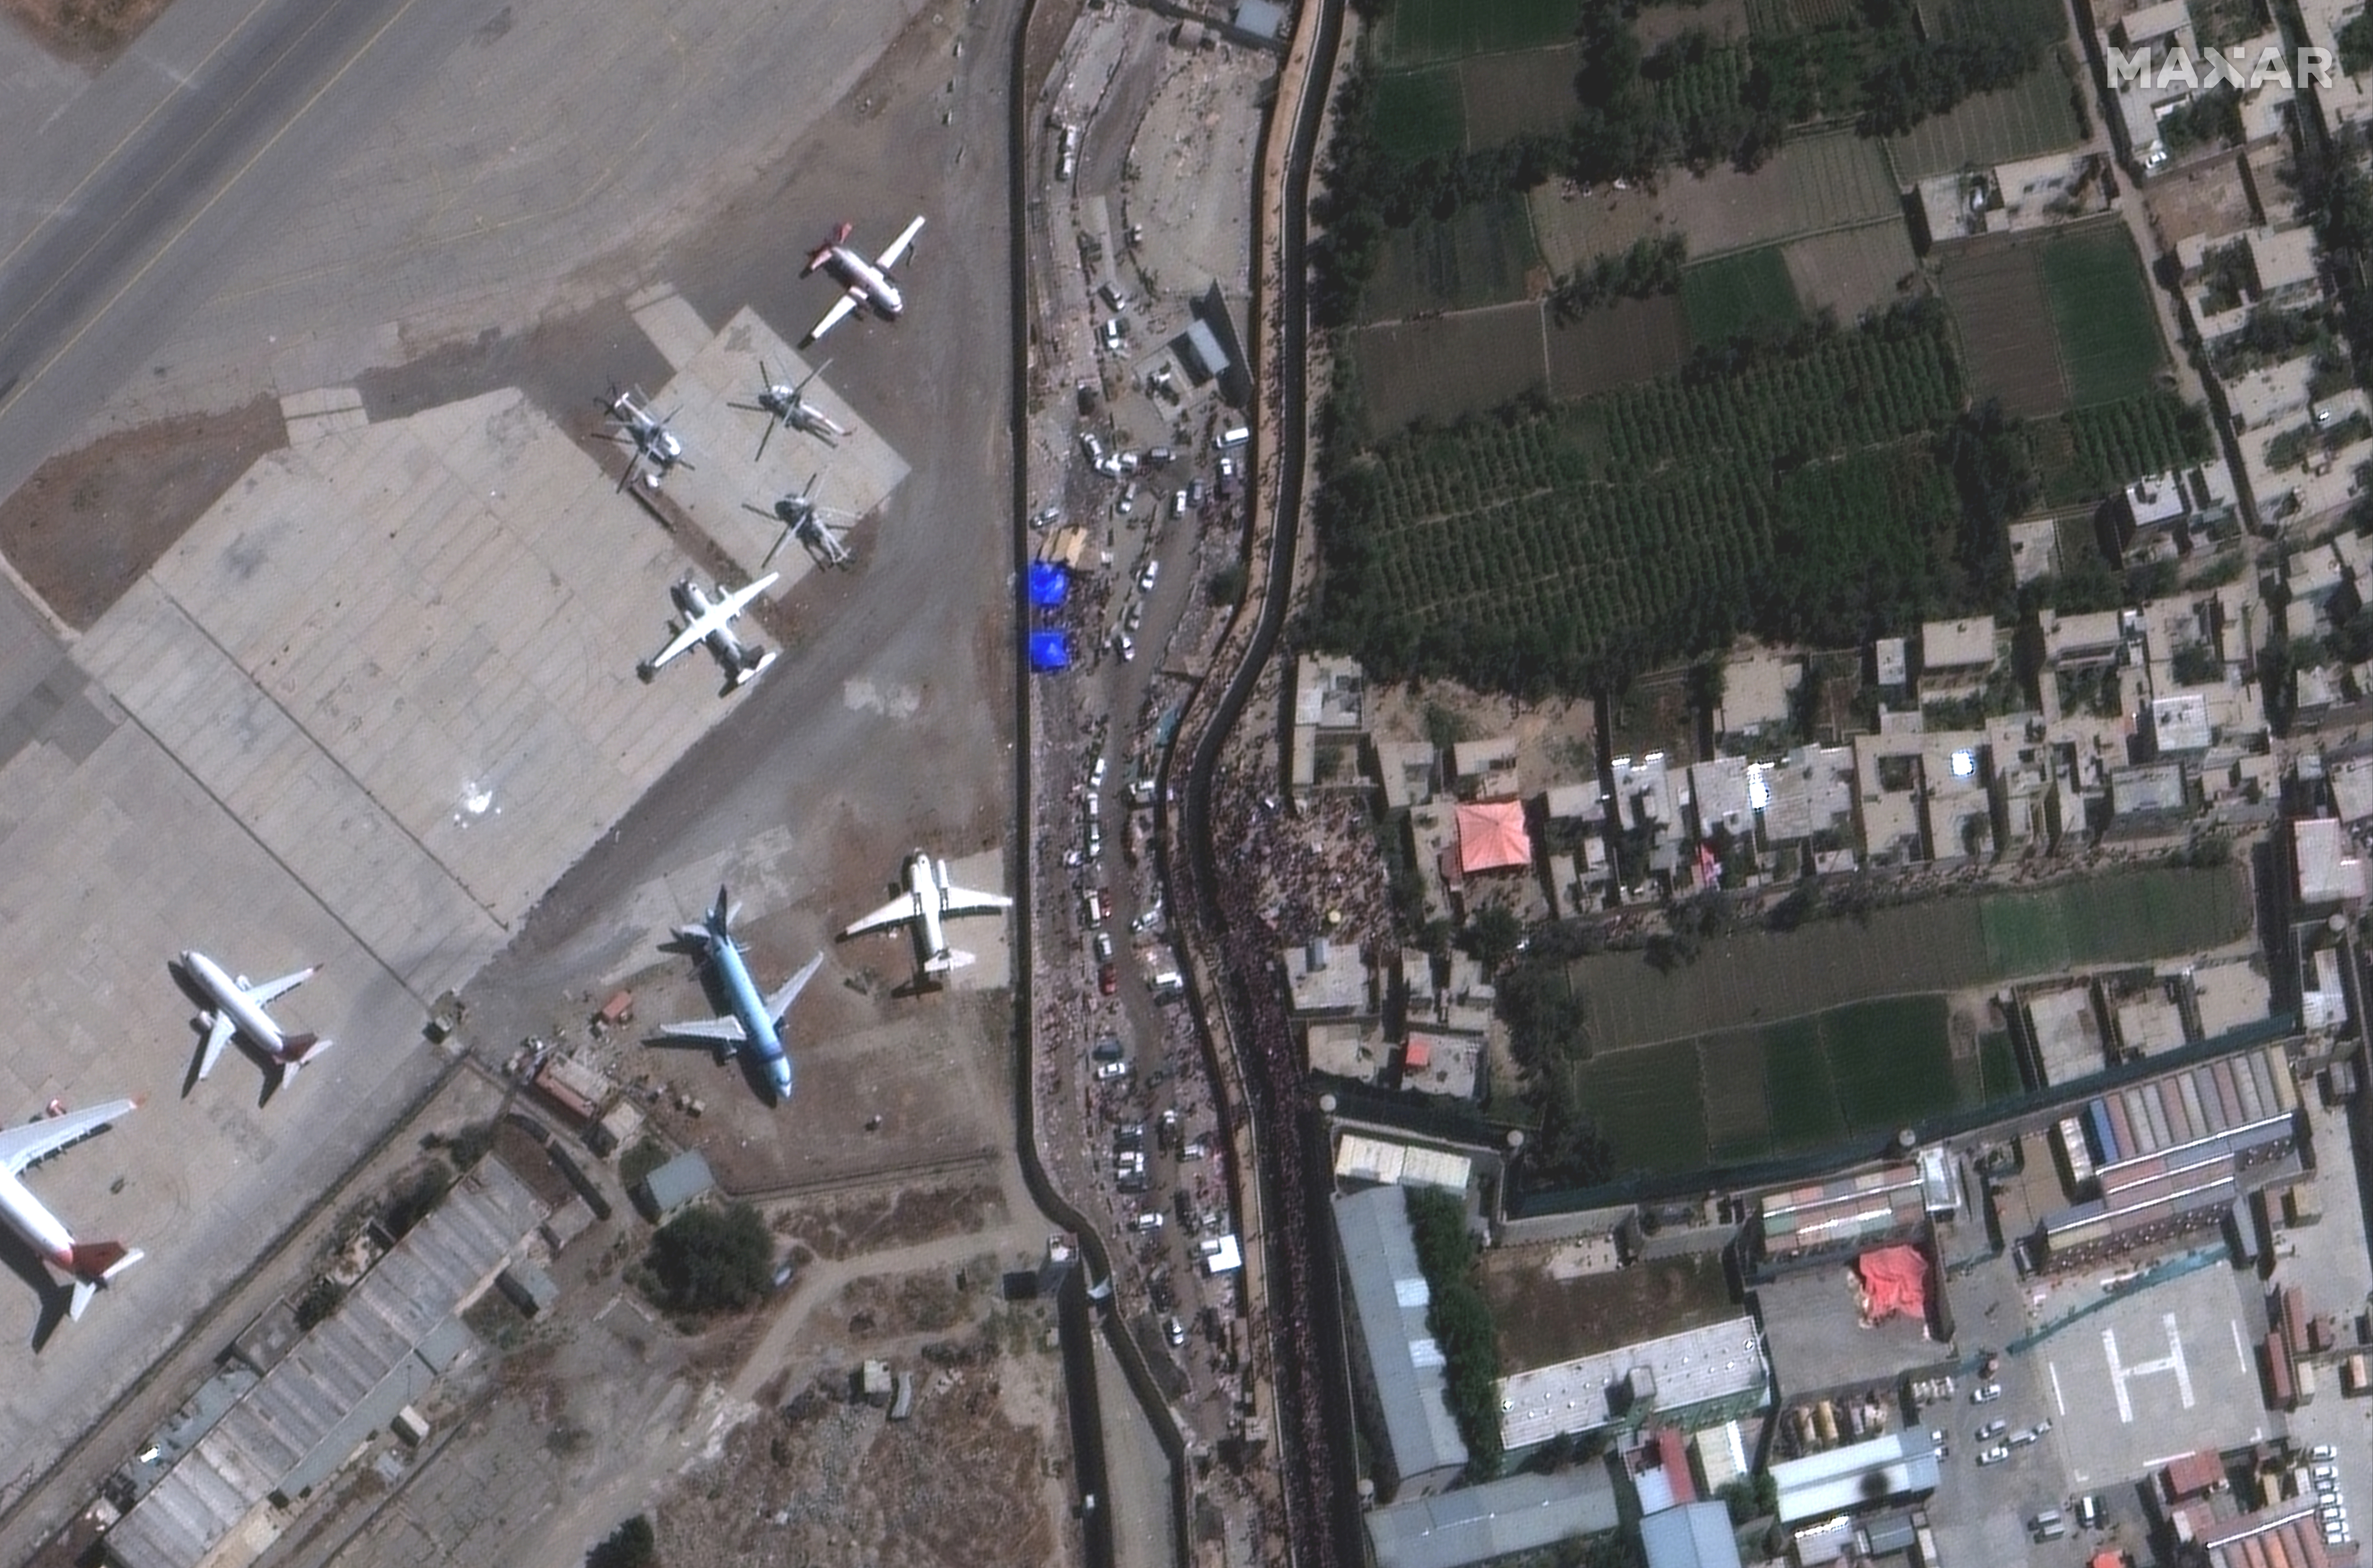 An overview of crowds at the Abbey Gate at Hamid Karzai International Airport, in Kabul, Afghanistan August 24, 2021, in this satellite image obtained by Reuters on August 26, 2021.  Satellite image 2021 Maxar Technologies/Handout via REUTERS.